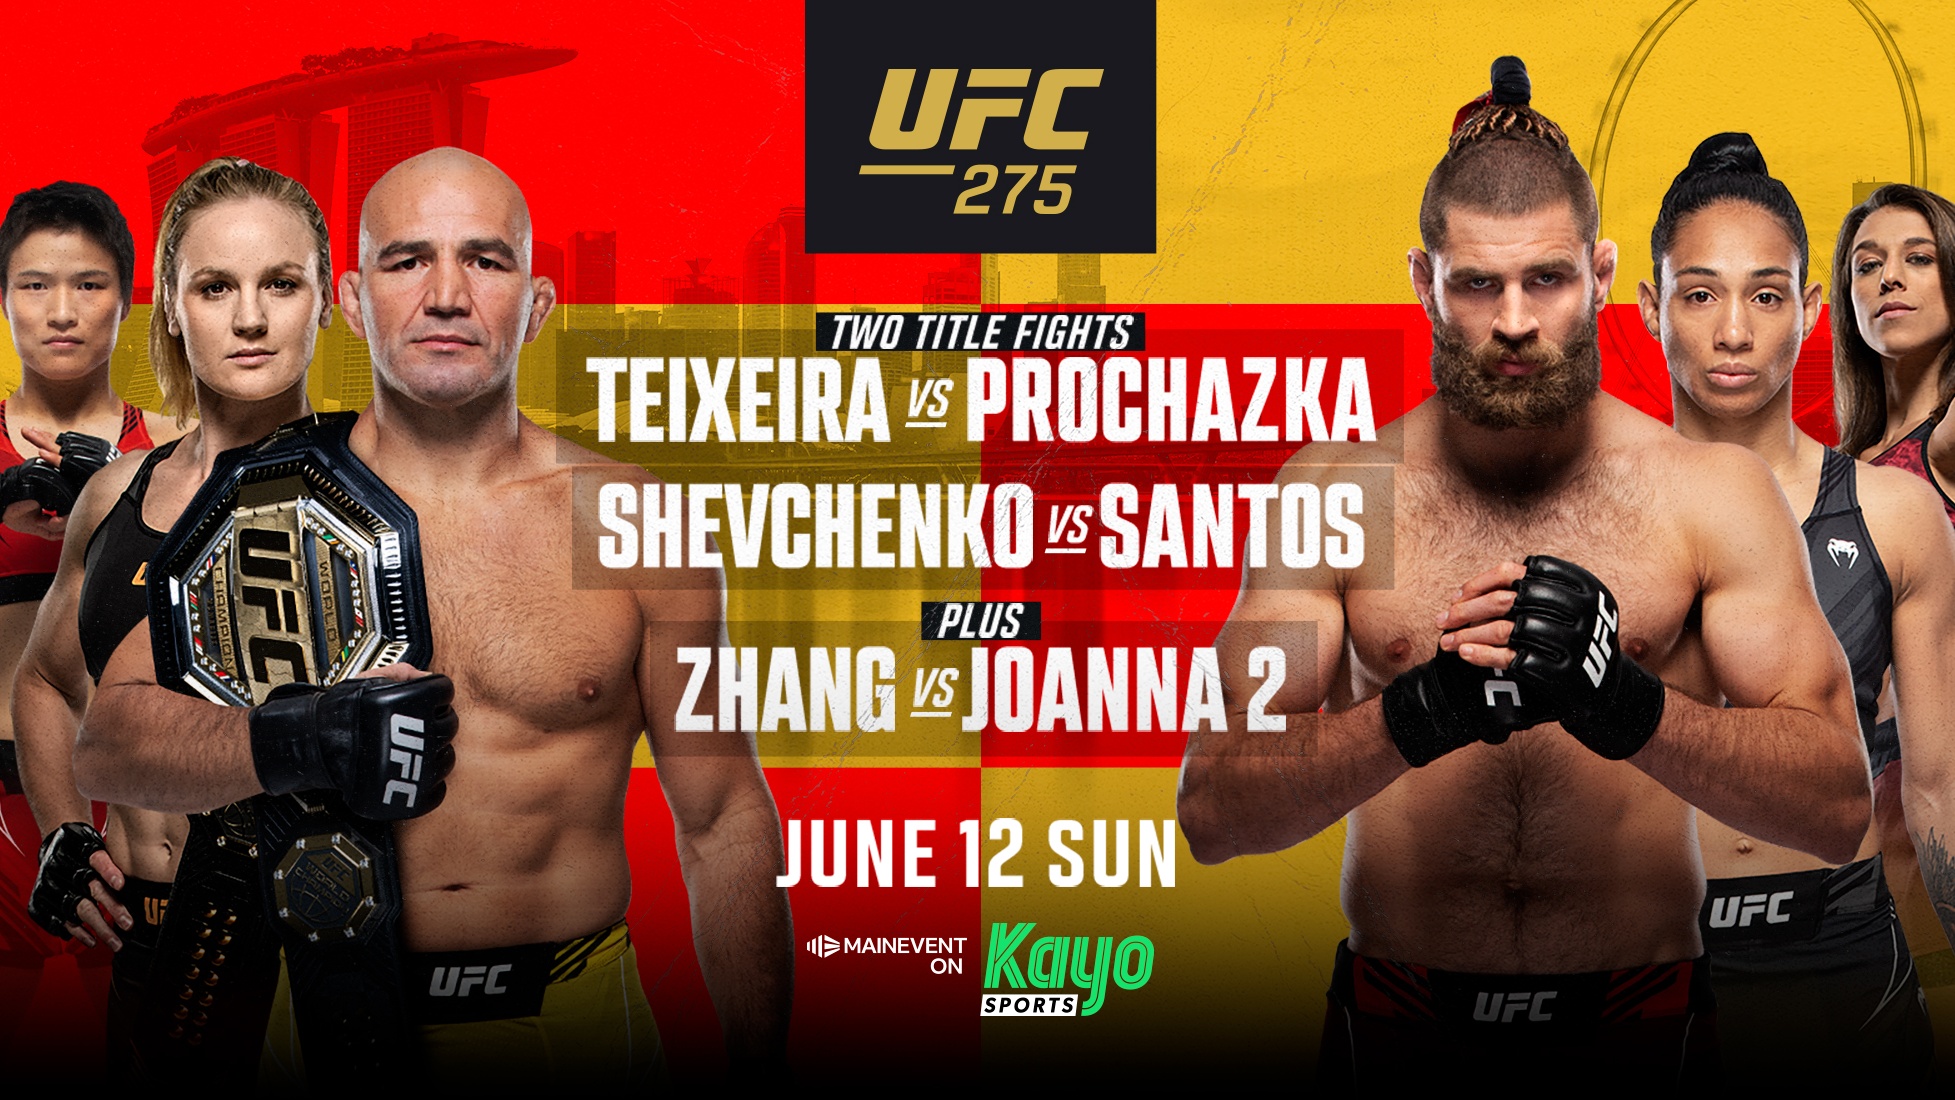 UFC 275 live stream and how to watch Teixeira vs Procházka online and on TV